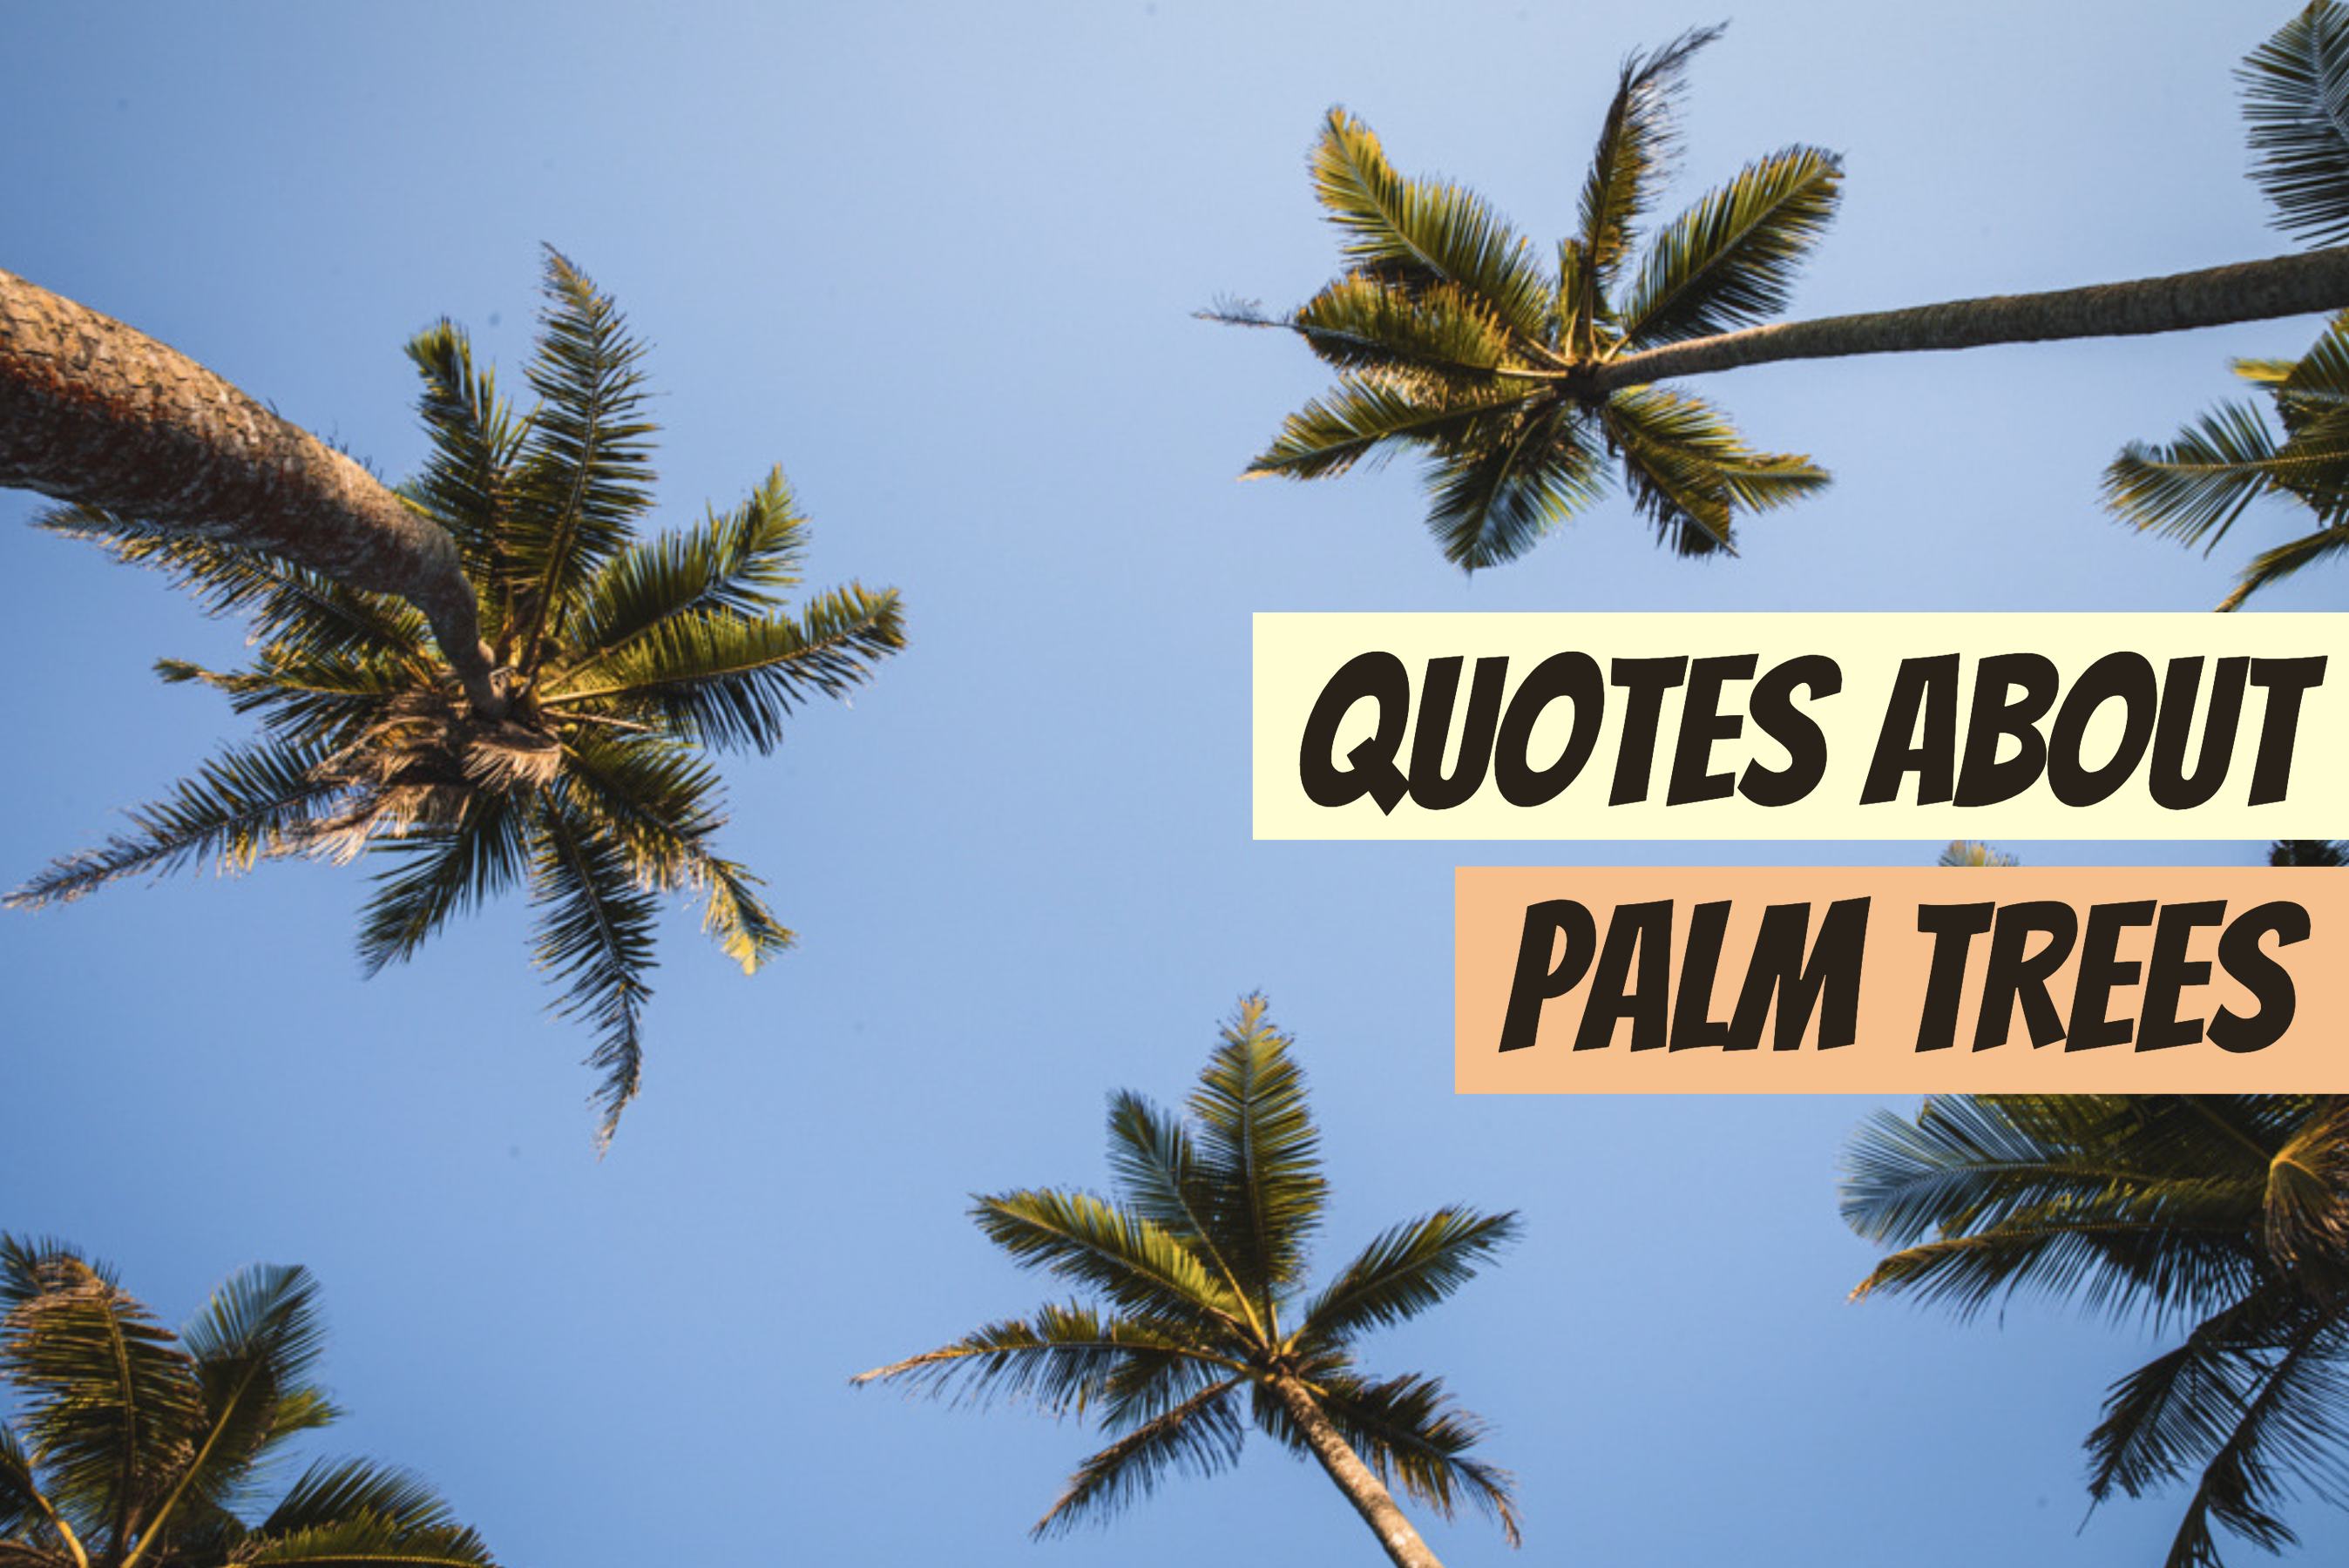 63 Quotes About Palm Trees for Your Instagram Captions - Laure Wanders